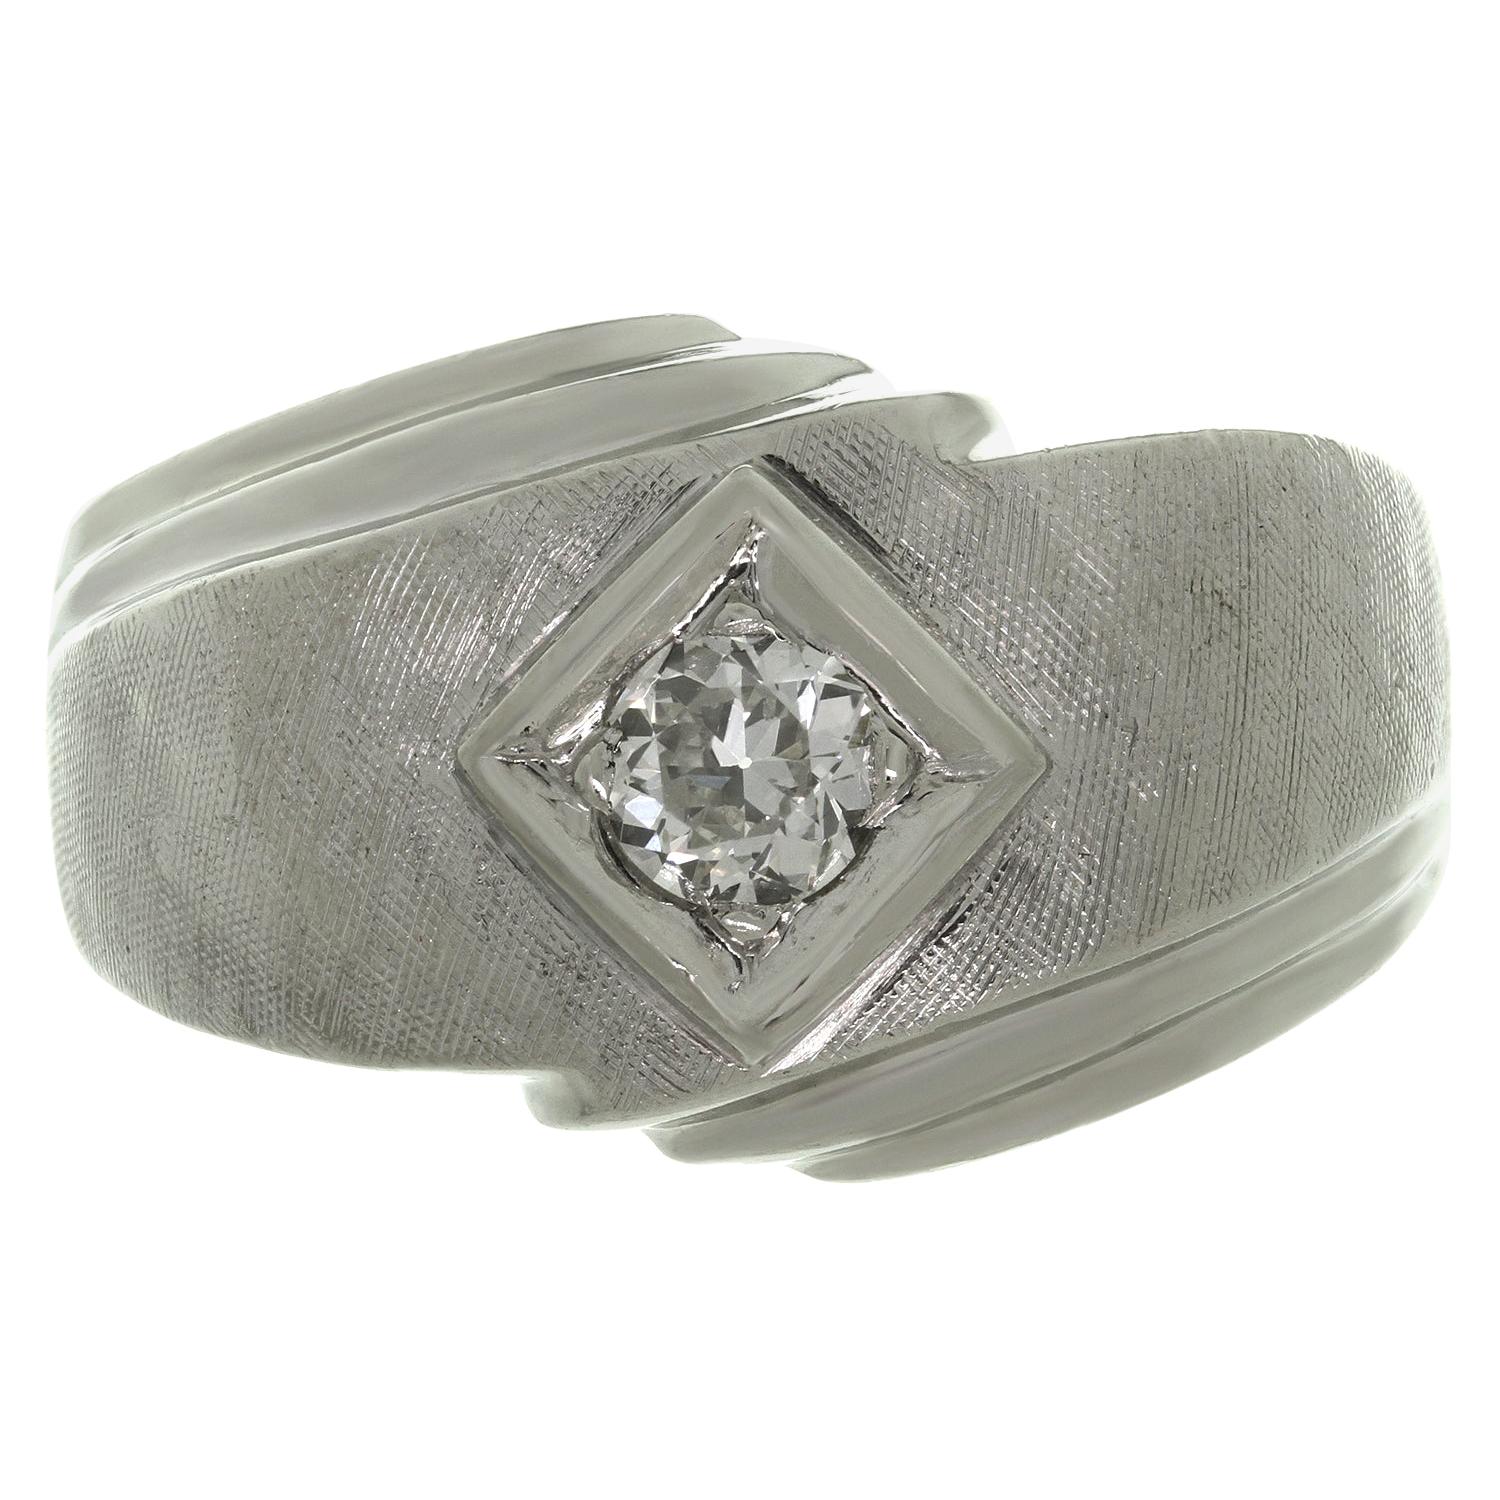 This classic retro men's ring is crafted in 14k textured white gold and set with old European-cut F-G VS1-VS2 diamond of an estimated 0.40 carats. Made in United States circa 1940s. Measurements: 0.51